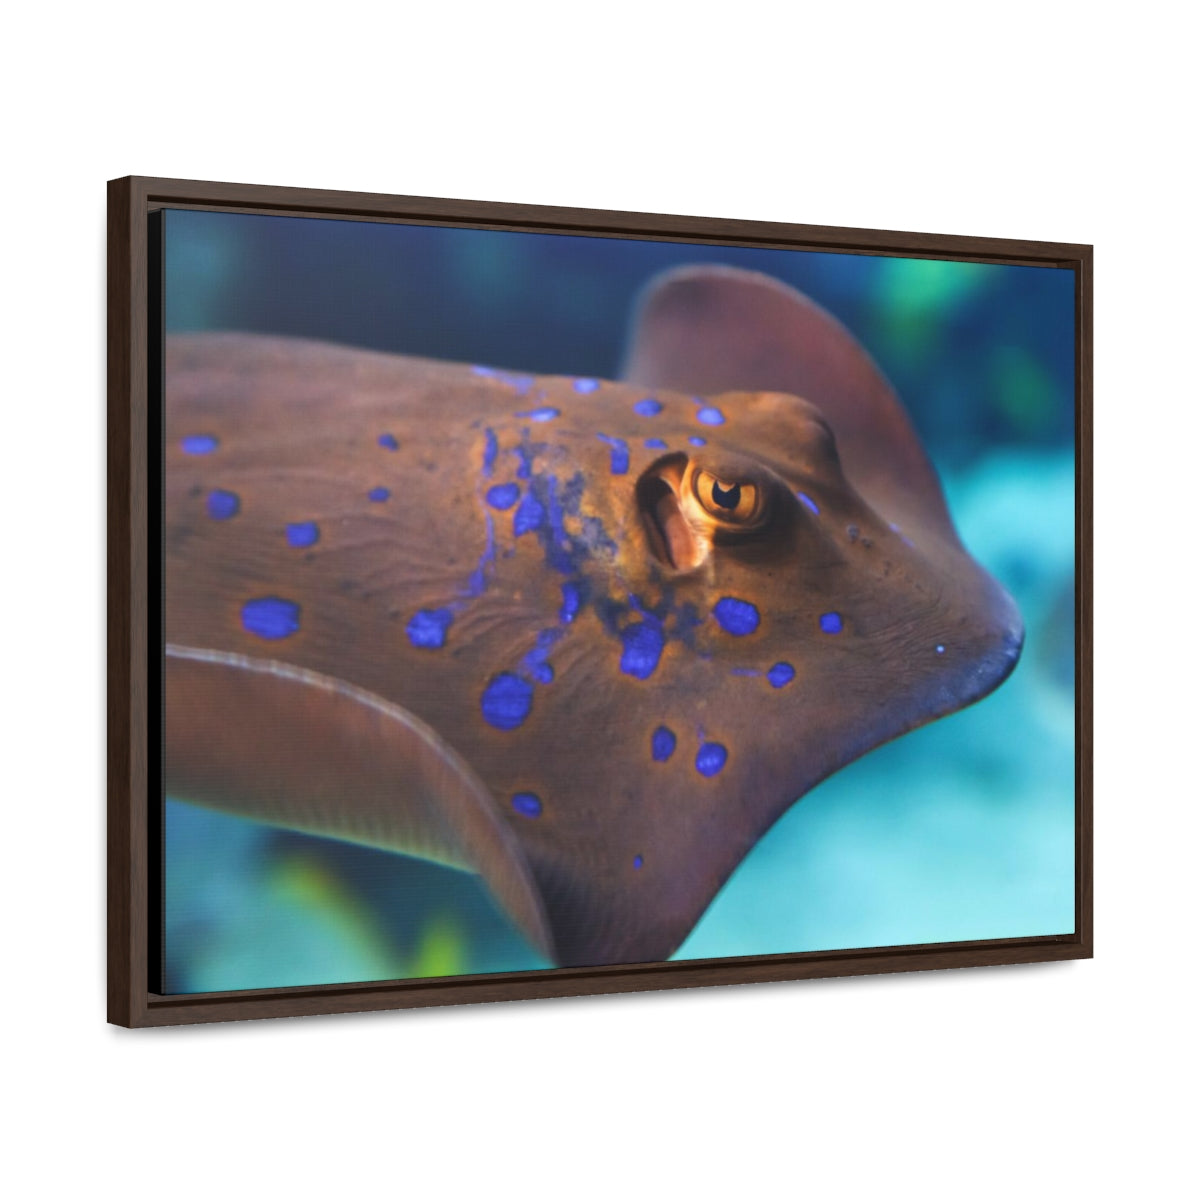 Blue Spotted Stingray Canvas Print